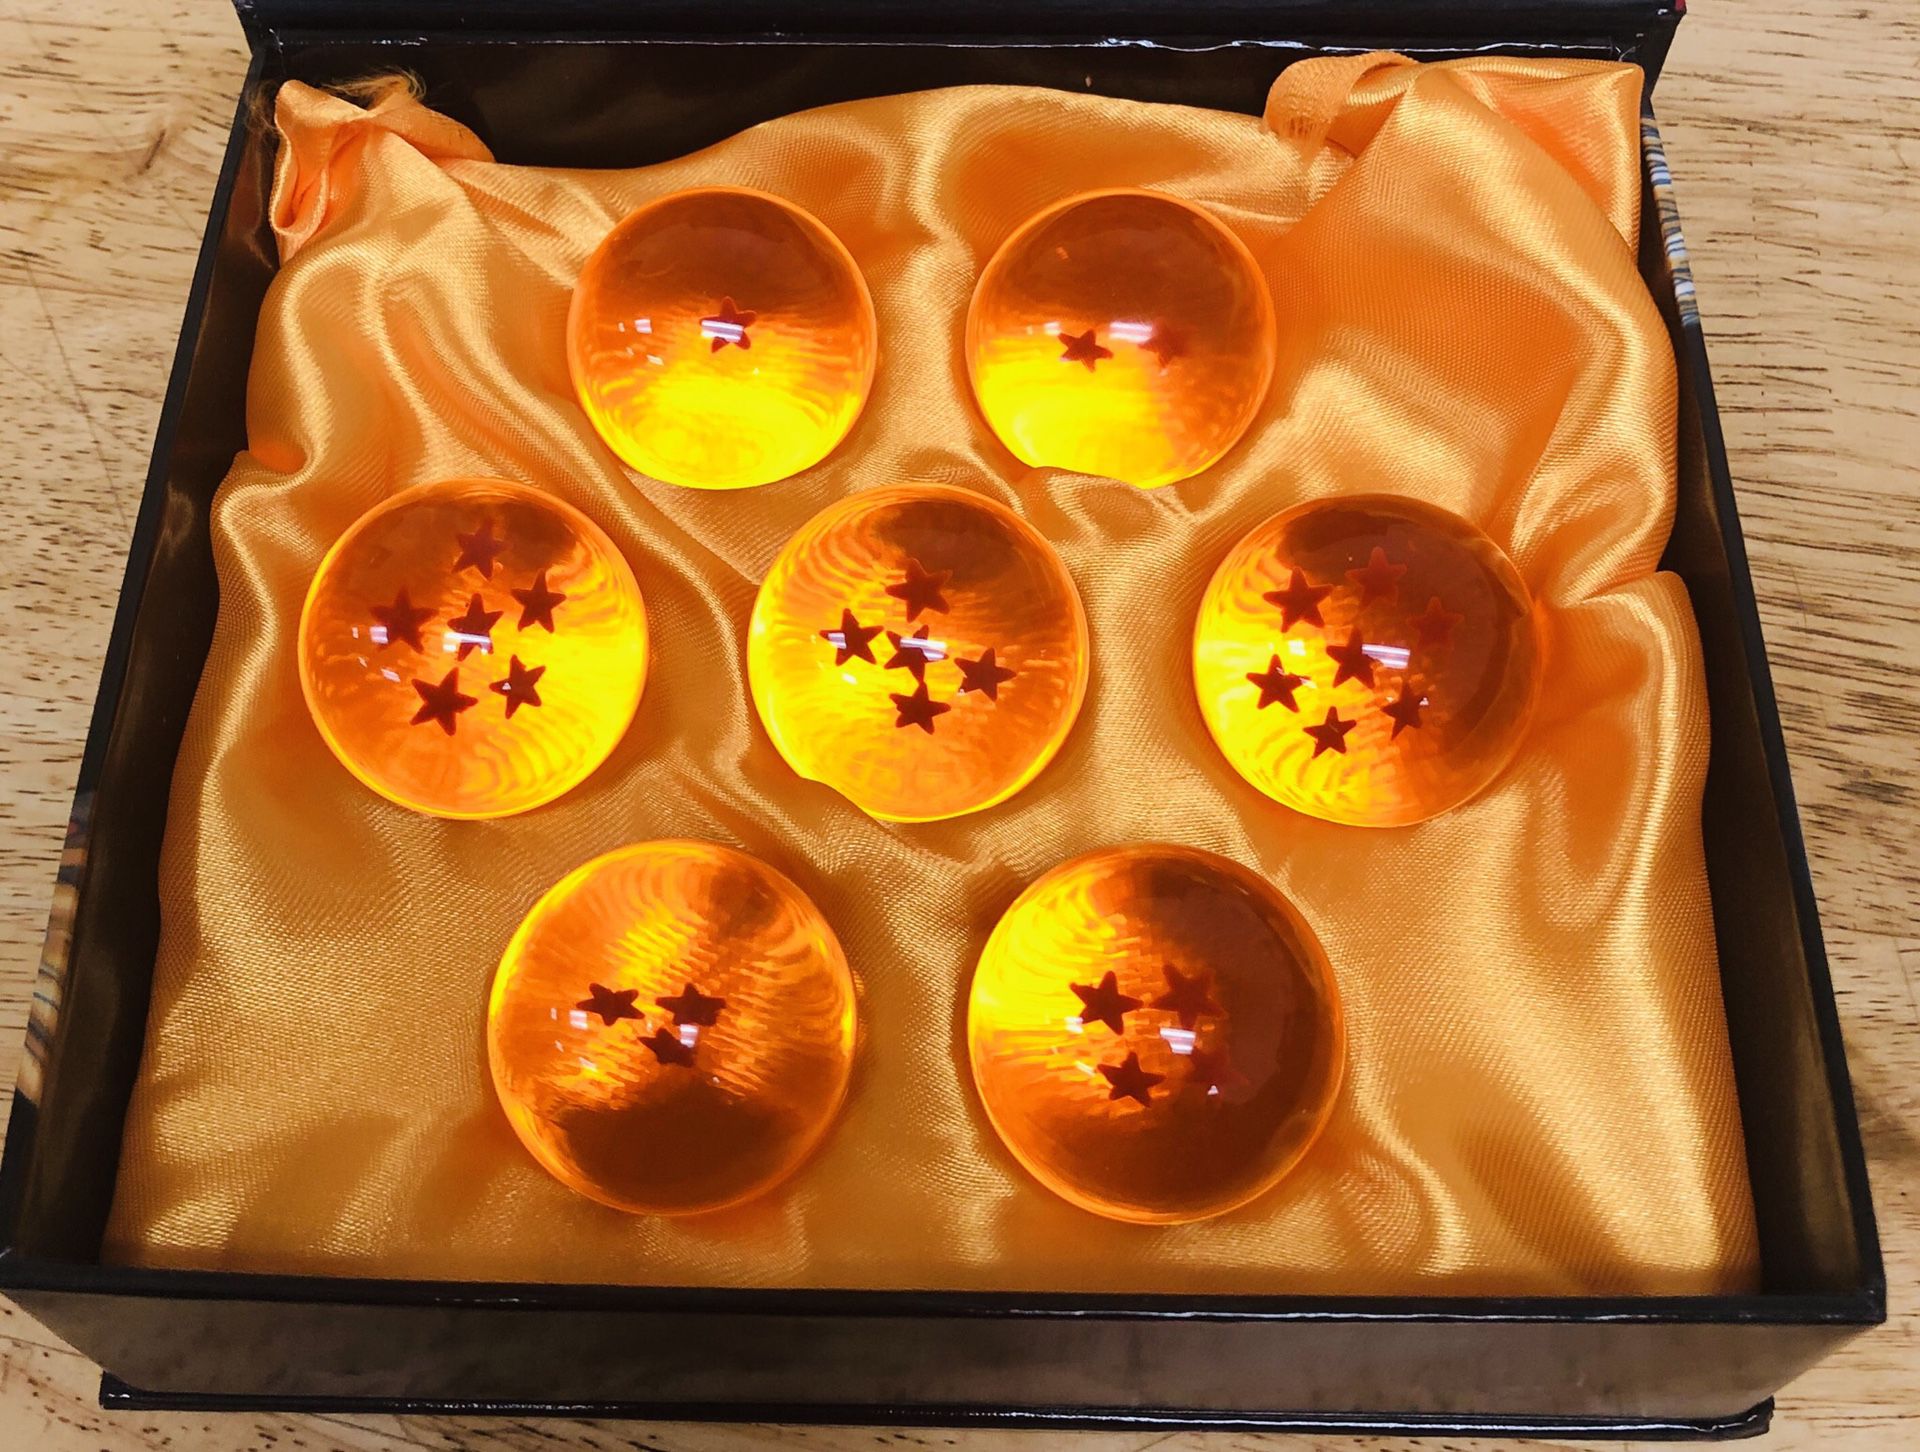 Dragon Ball Z Crystal Balls - Full Set of 7 - Great for any fan - Brand New In the box